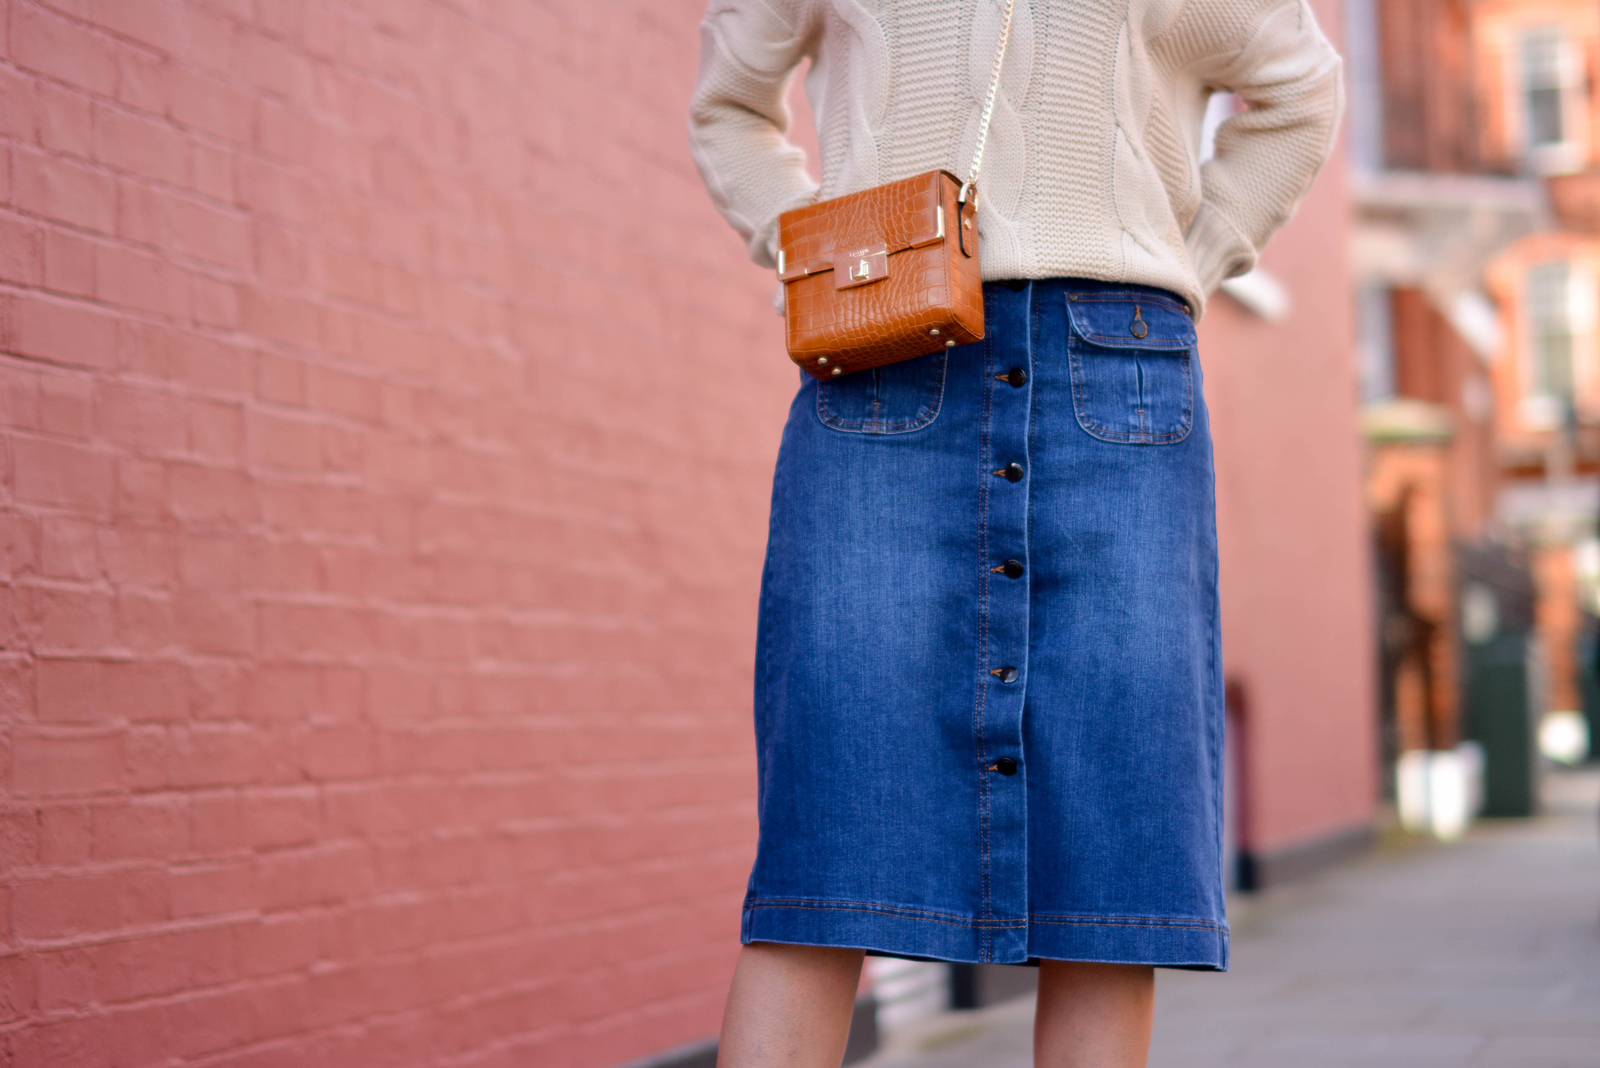 EJSTYLE-Emma-Hill-70s-style-london-street-style-LFW-AW15-MS-denim-a-line-skirt-off-shoulder-cable-knit-jumper-Dune-box-bag-tan.. - Cópia